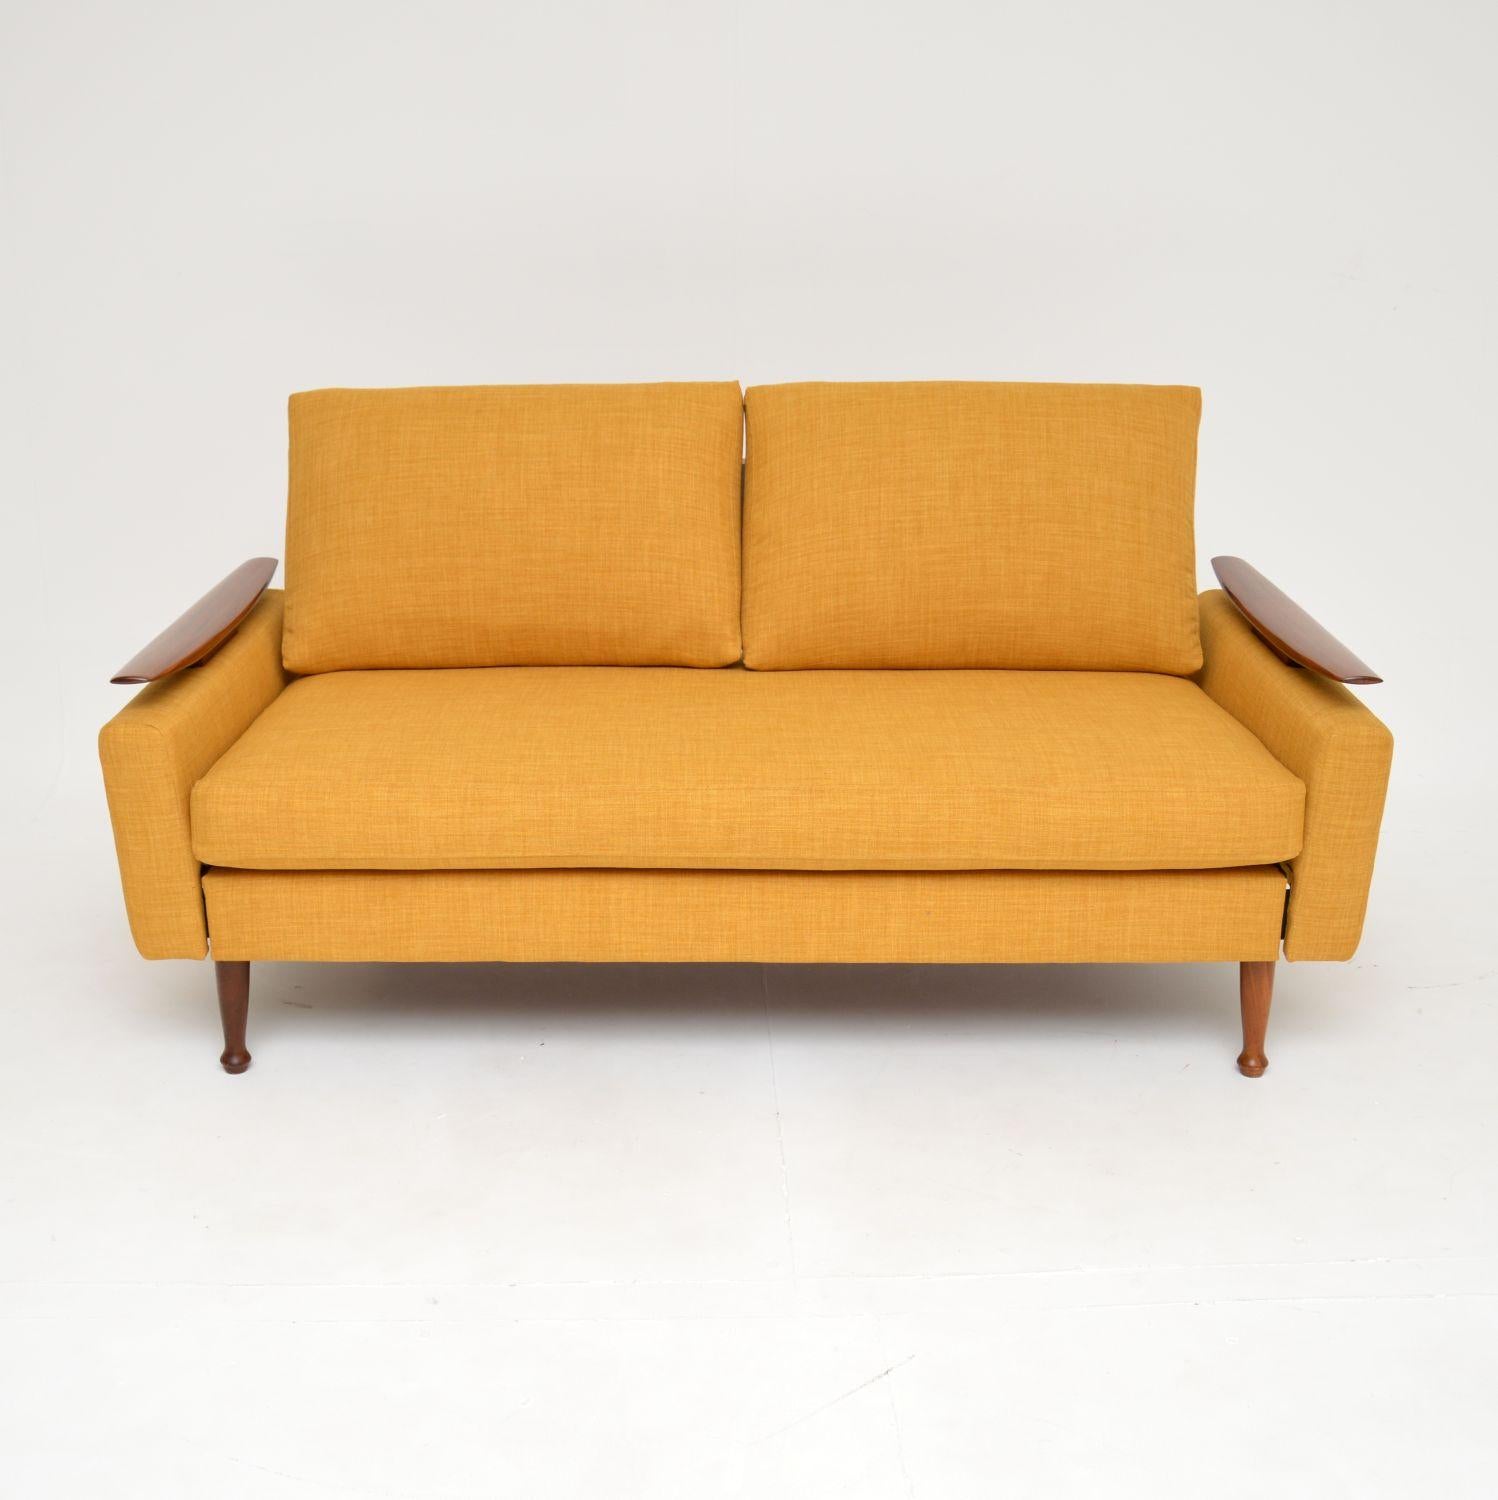 1960's Vintage Sofa Bed by Greaves & Thomas 3